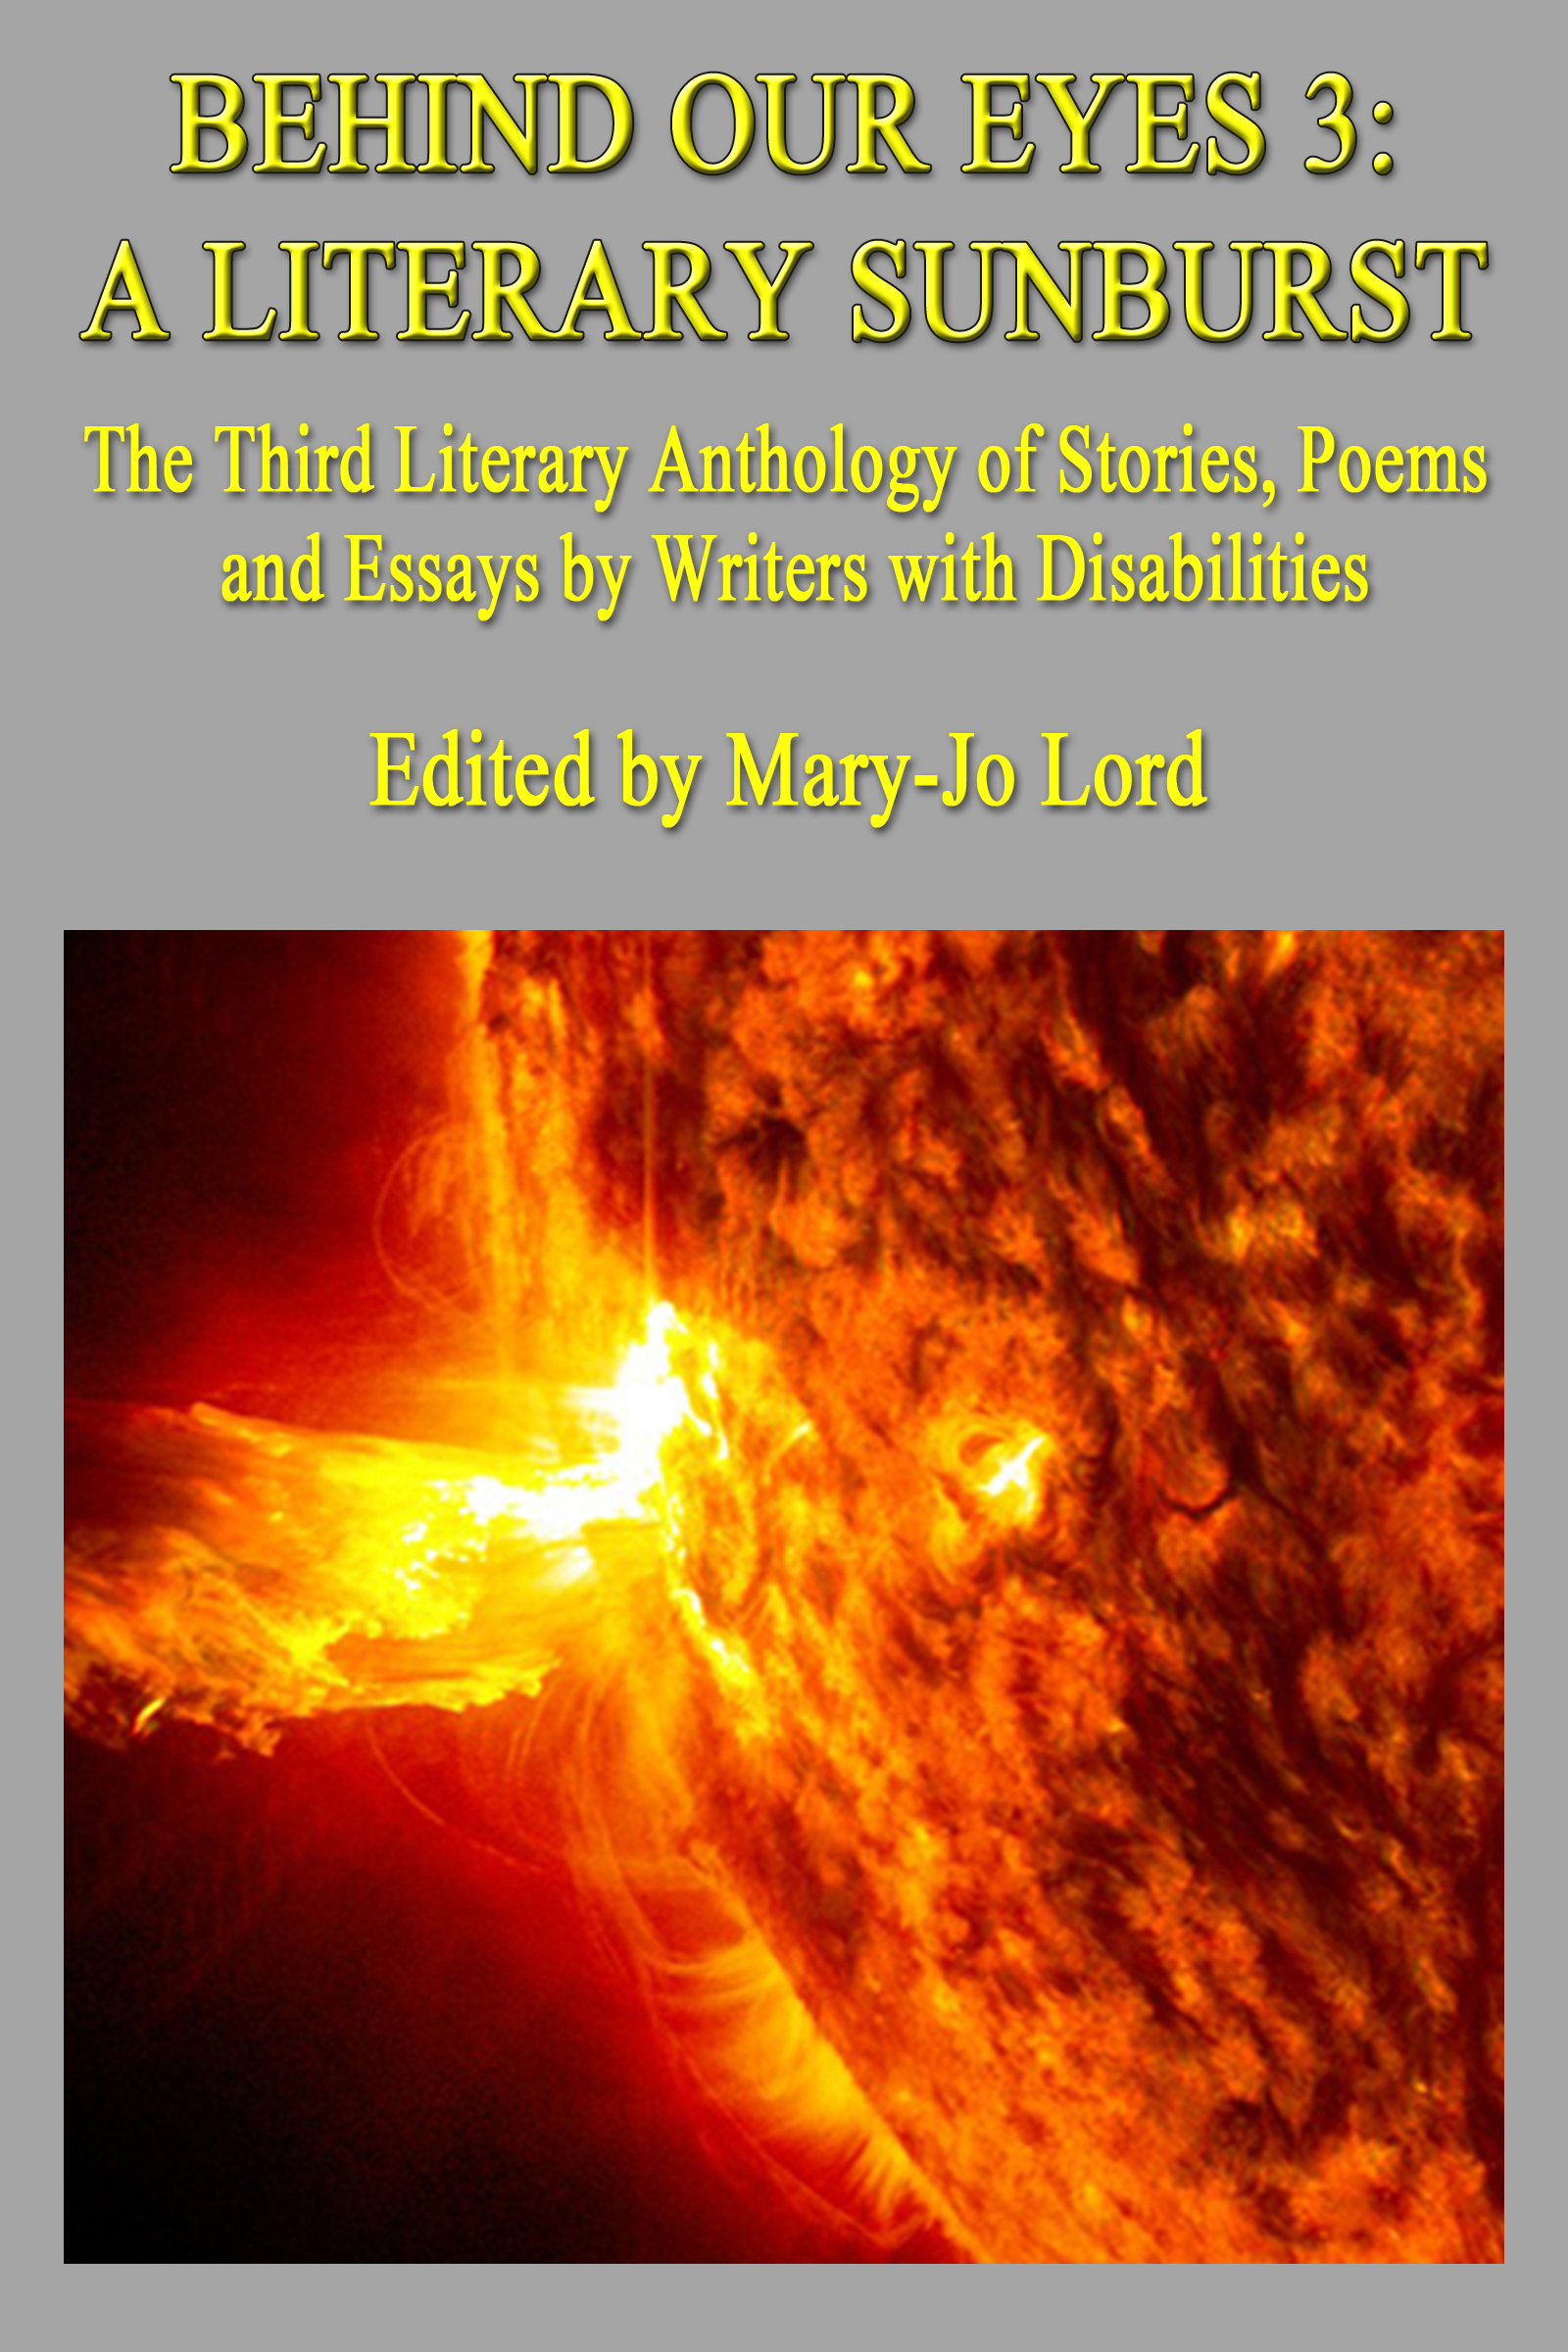 Text of cover image courtesy of Be My AI: The image is the cover of a book titled "Behind Our Eyes 3: A Literary Sunburst." The subtitle reads, "The Third Literary Anthology of Stories, Poems and Essays by Writers with Disabilities." The book is edited by Mary-Jo Lord. The background of the cover is gray, and the text is in yellow. Below the text, there is an image of a bright, fiery sunburst, showing intense solar activity with vivid orange and yellow colors.